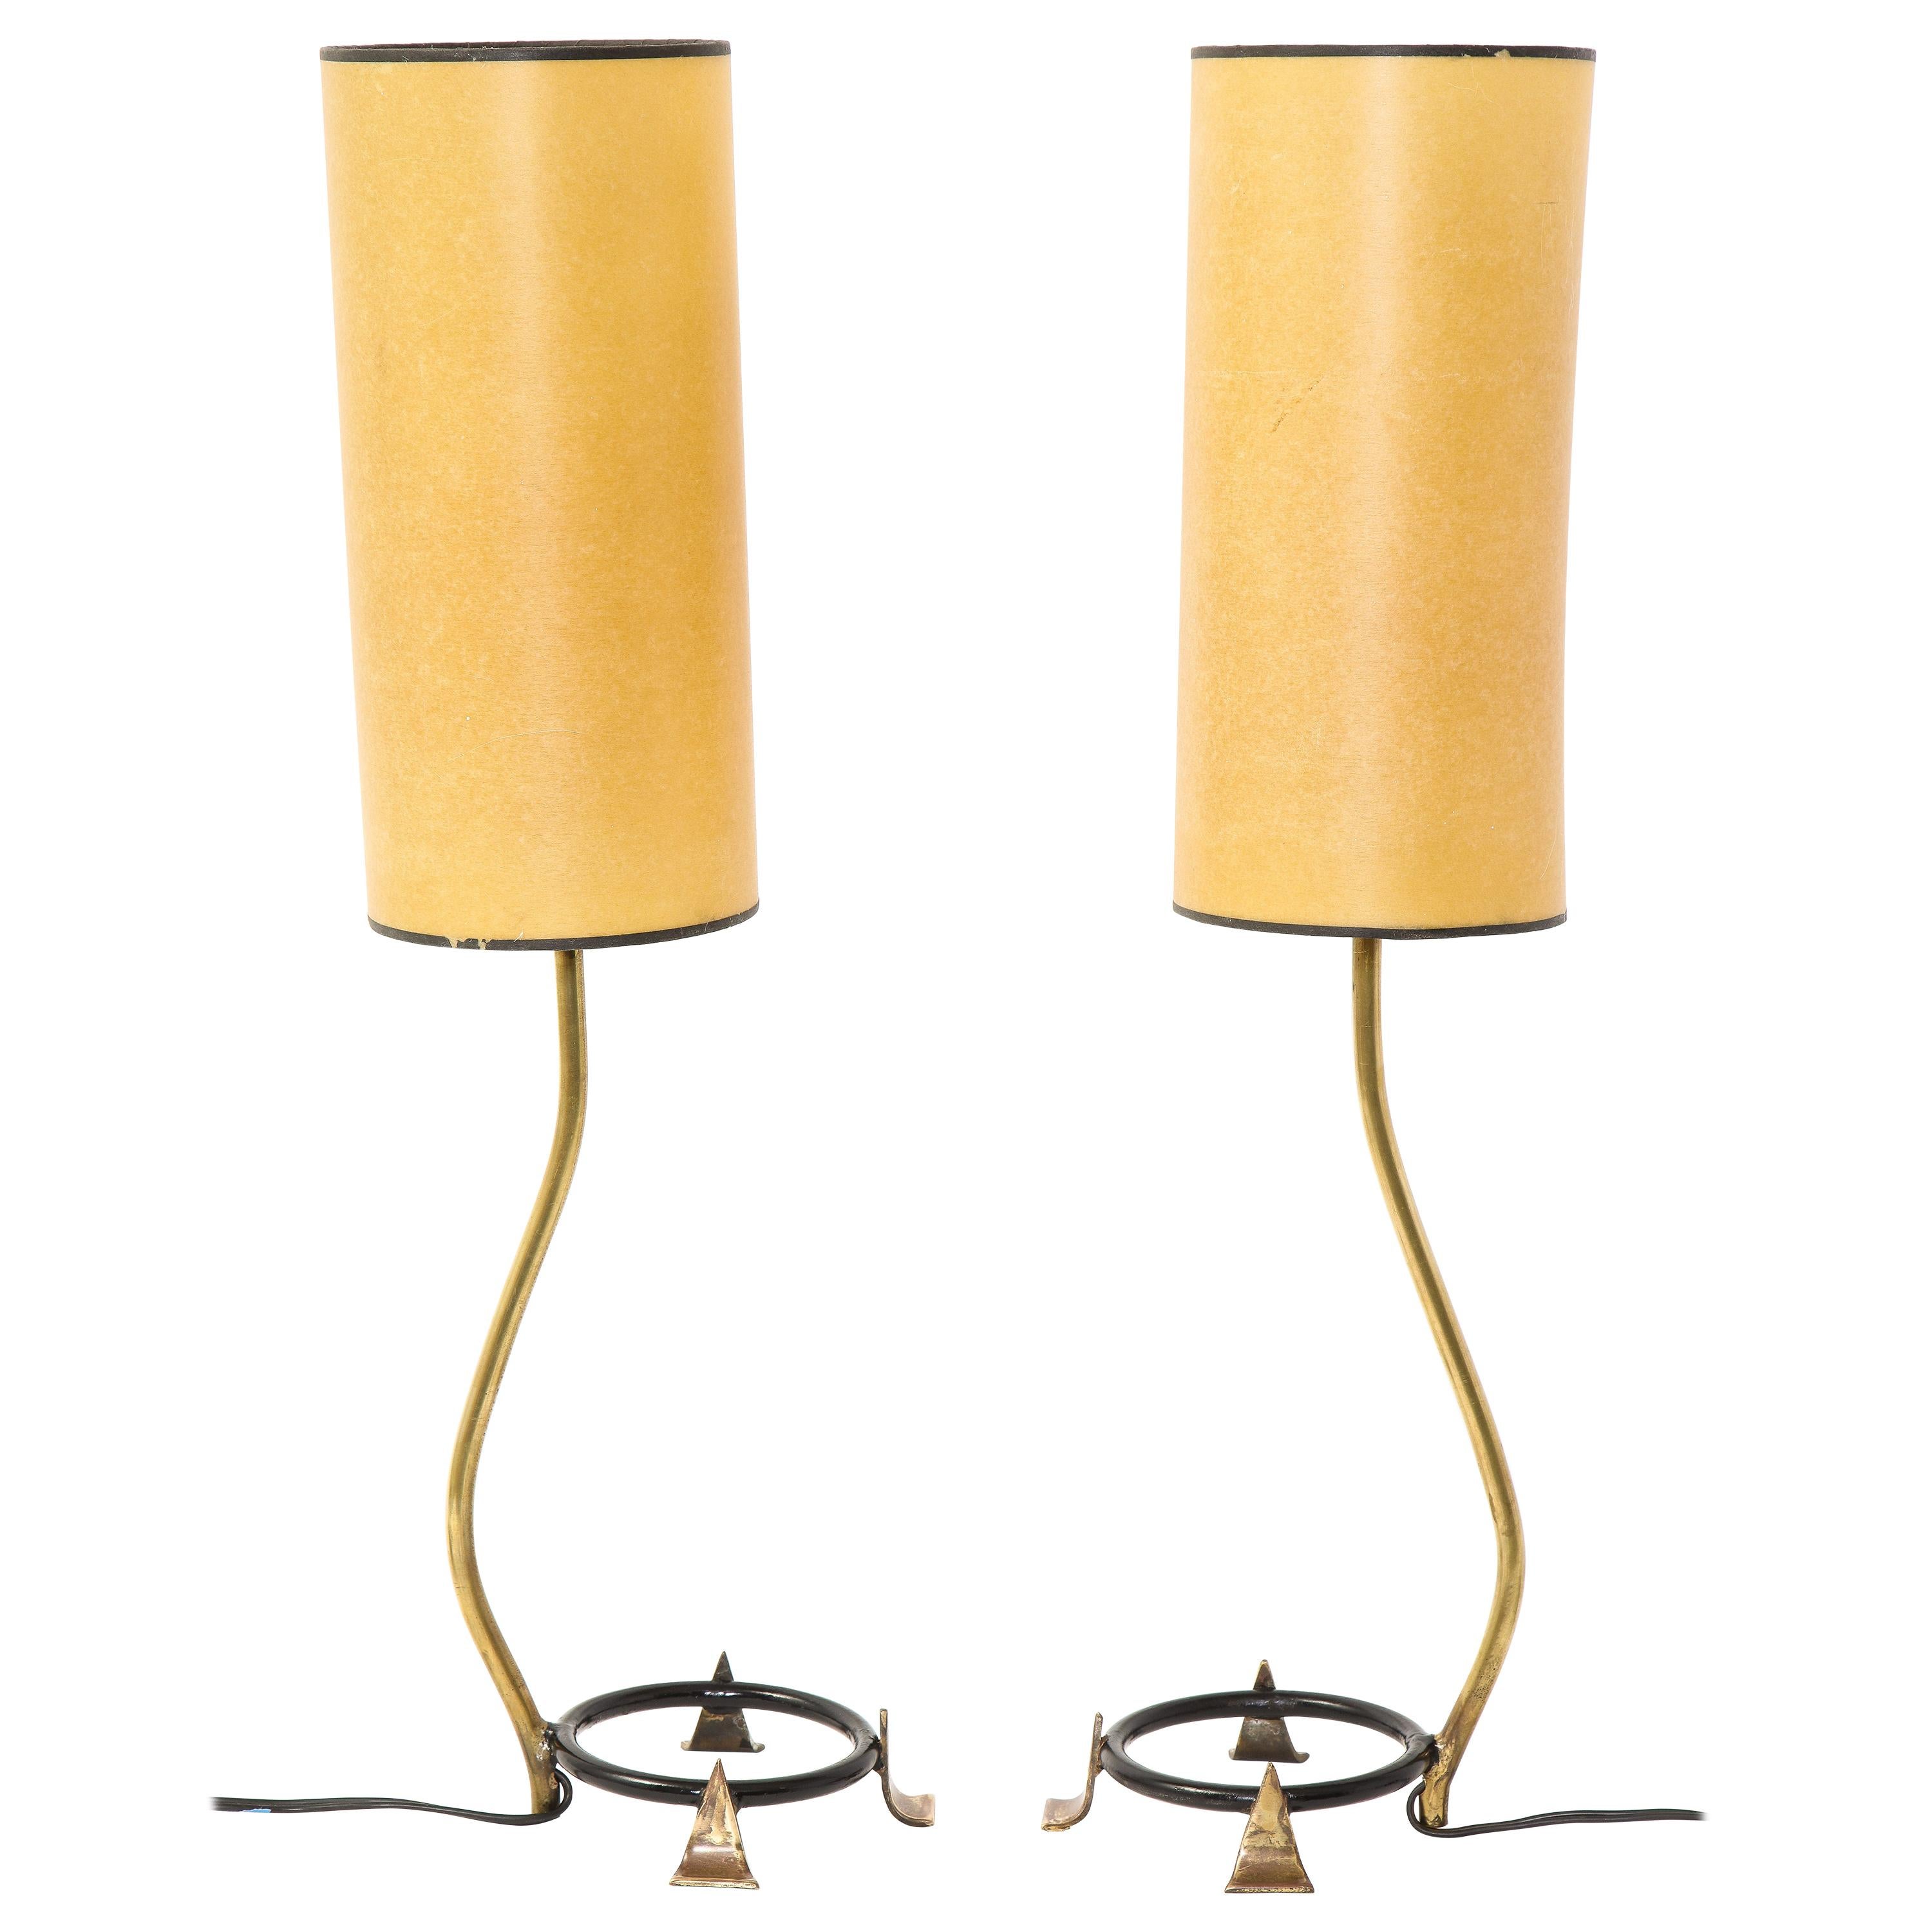 Pair of Arlus brass Table Lamps